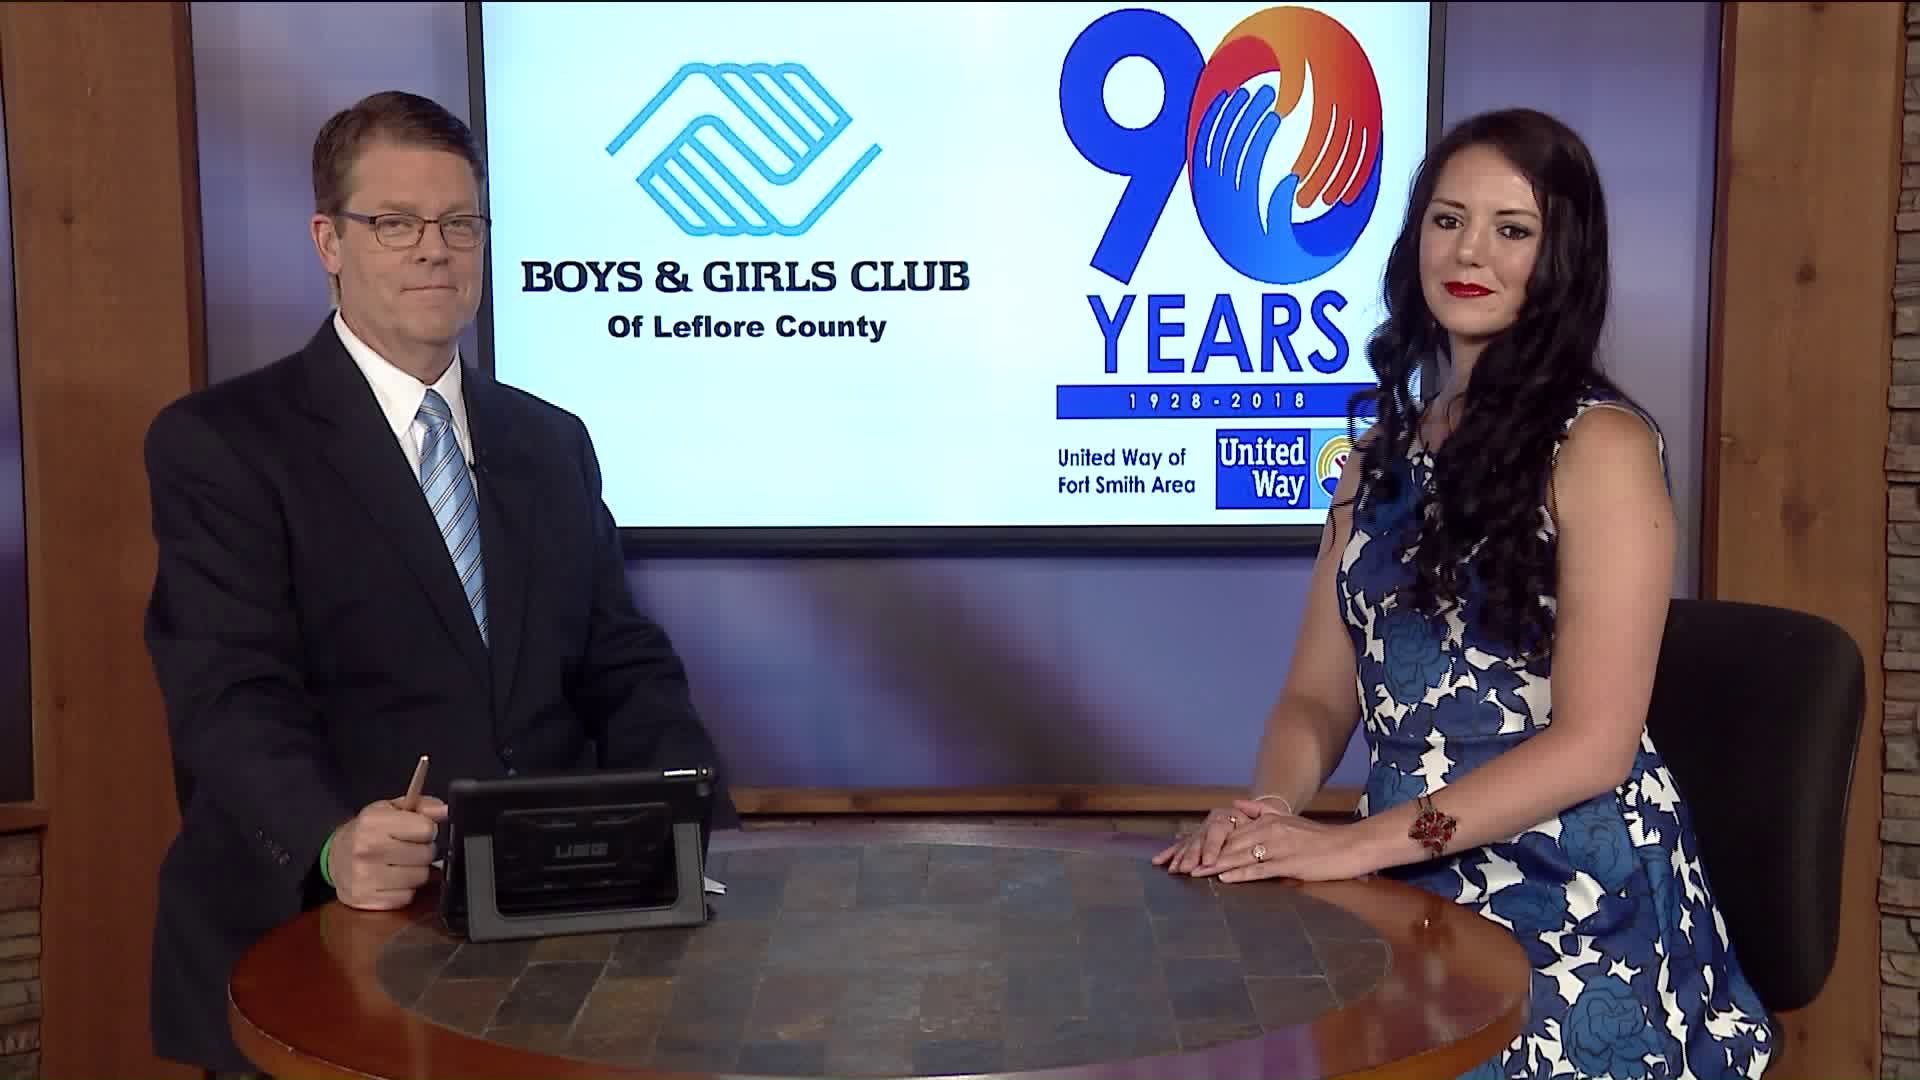 Leflore County Boys and Girls Club